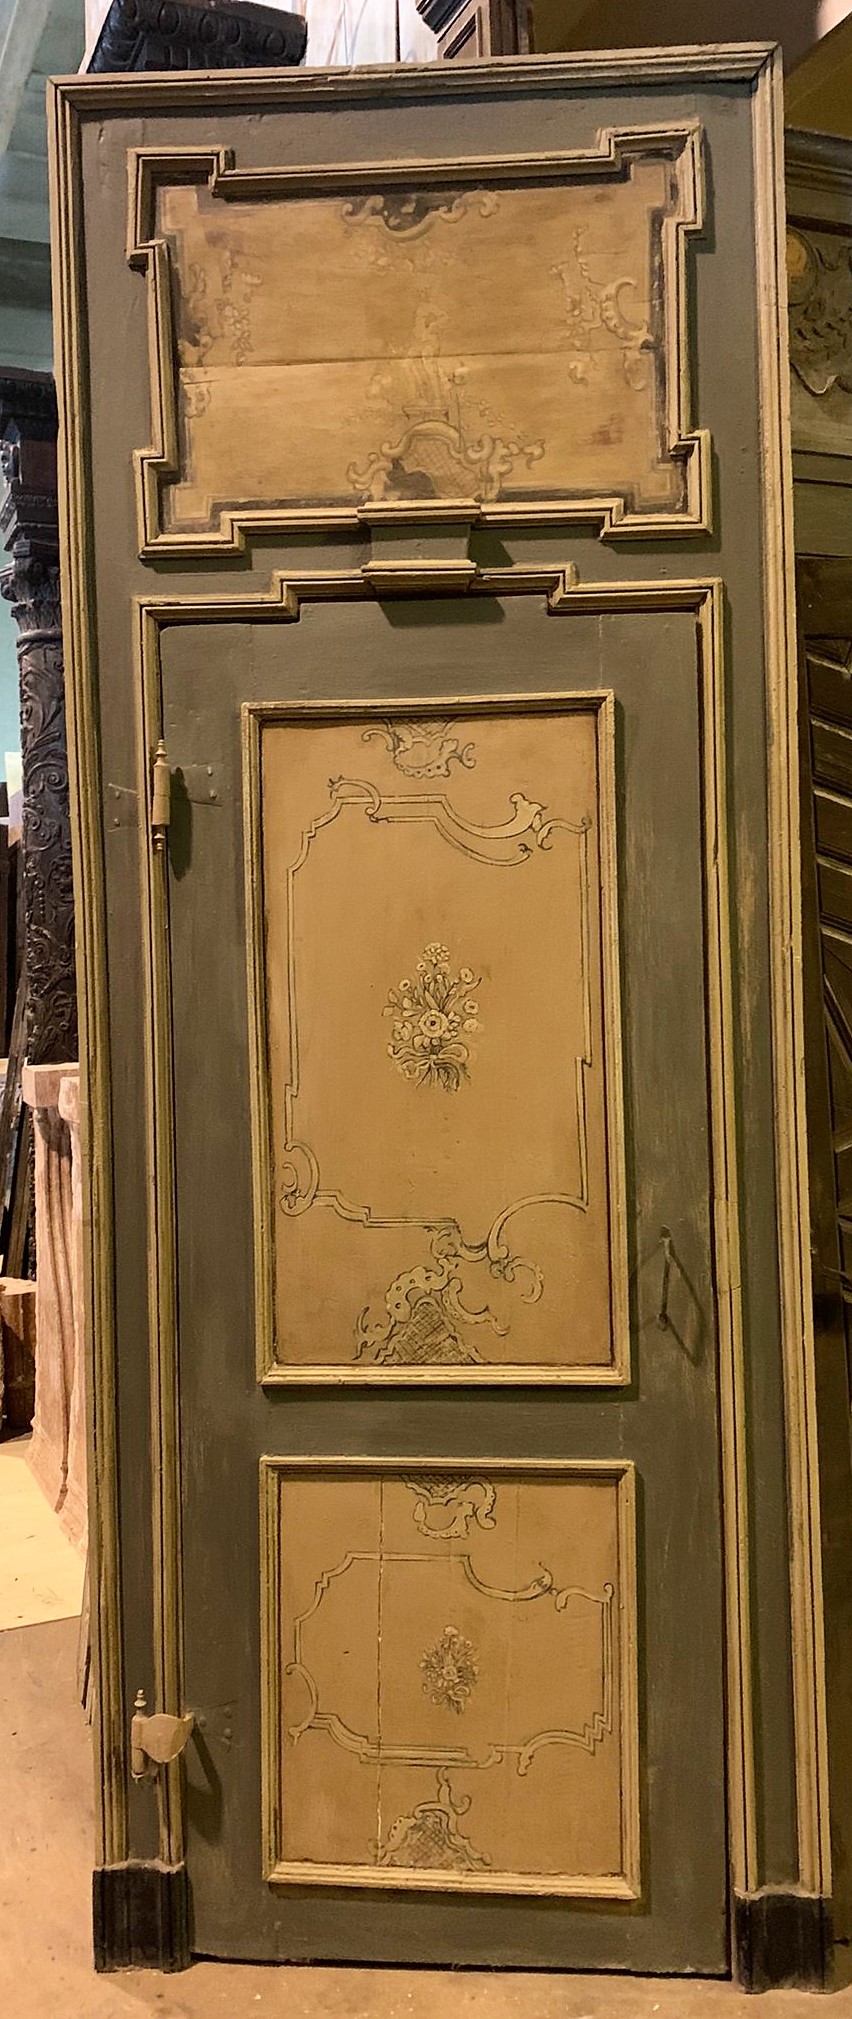 A ptl536 - lacquered door with paintings, complete with frame, cm 109 x h 280